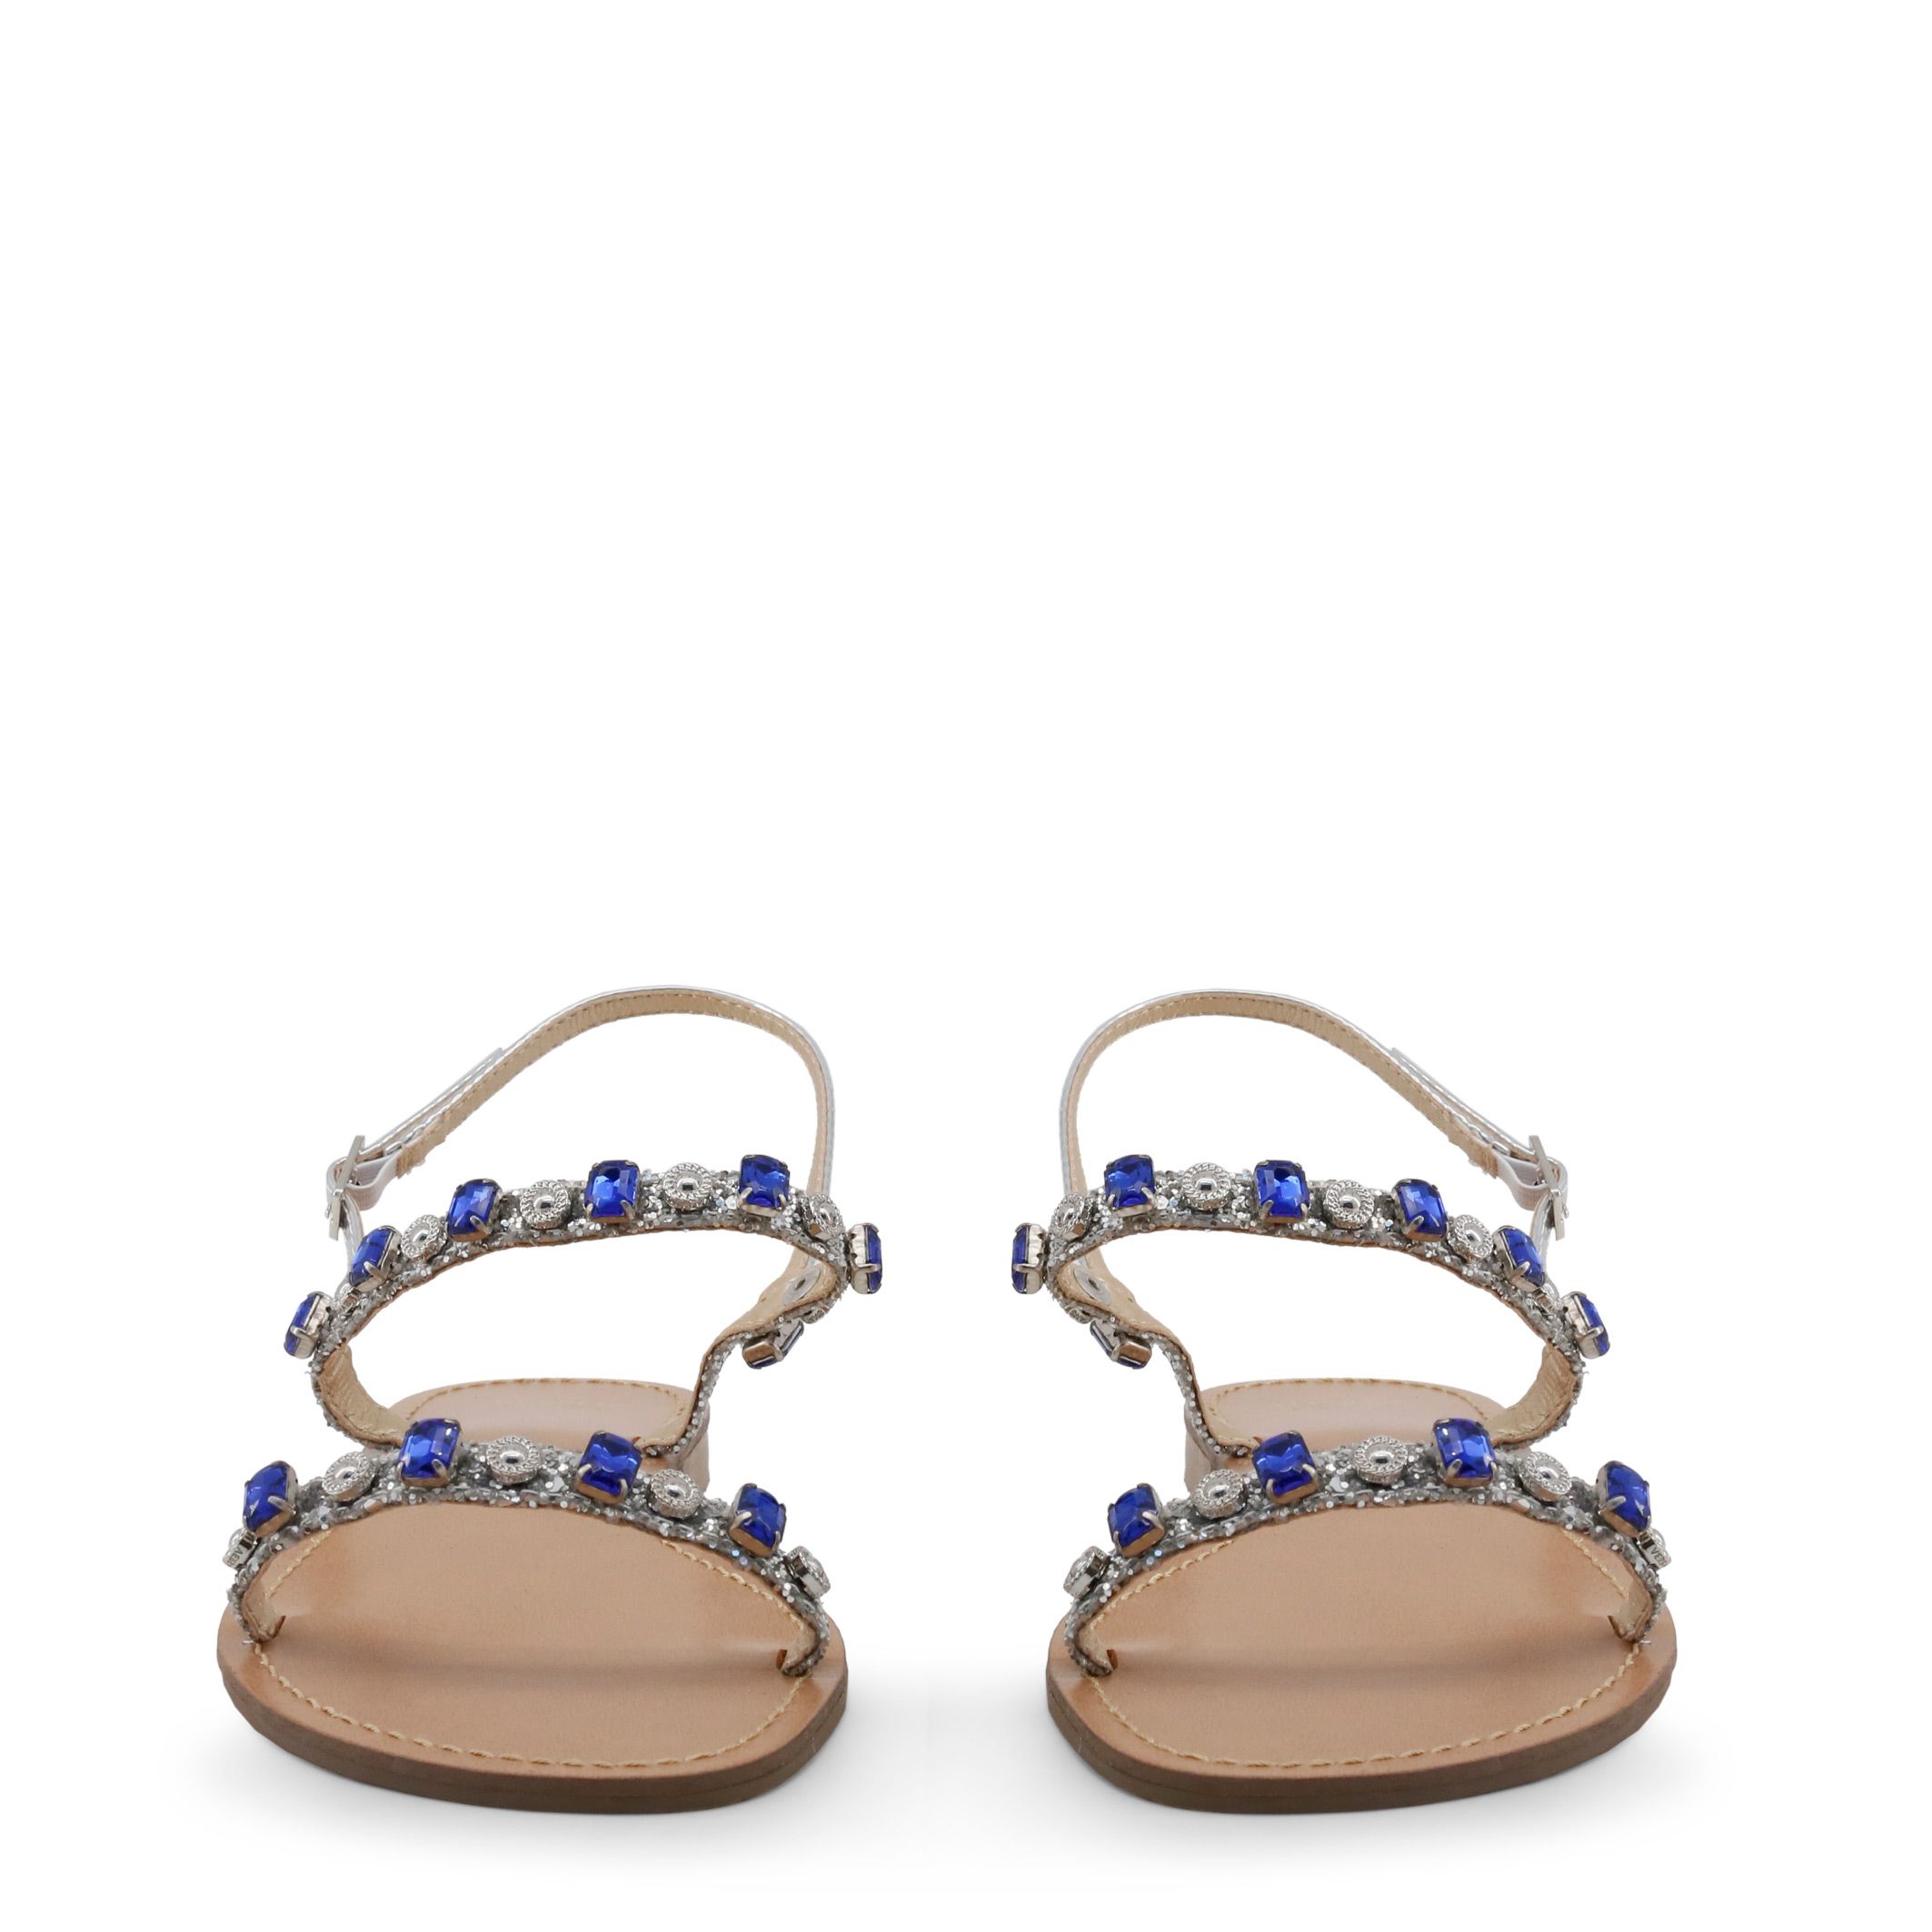 Collection: Spring/Summer <br> Gender: Woman <br> Type: Sandals <br> Upper: synthetic material <br> Internal lining: synthetic material, leather <br> Sole: synthetic material <br> Heel height cm: 1 <br> Details: studs, ankle strap